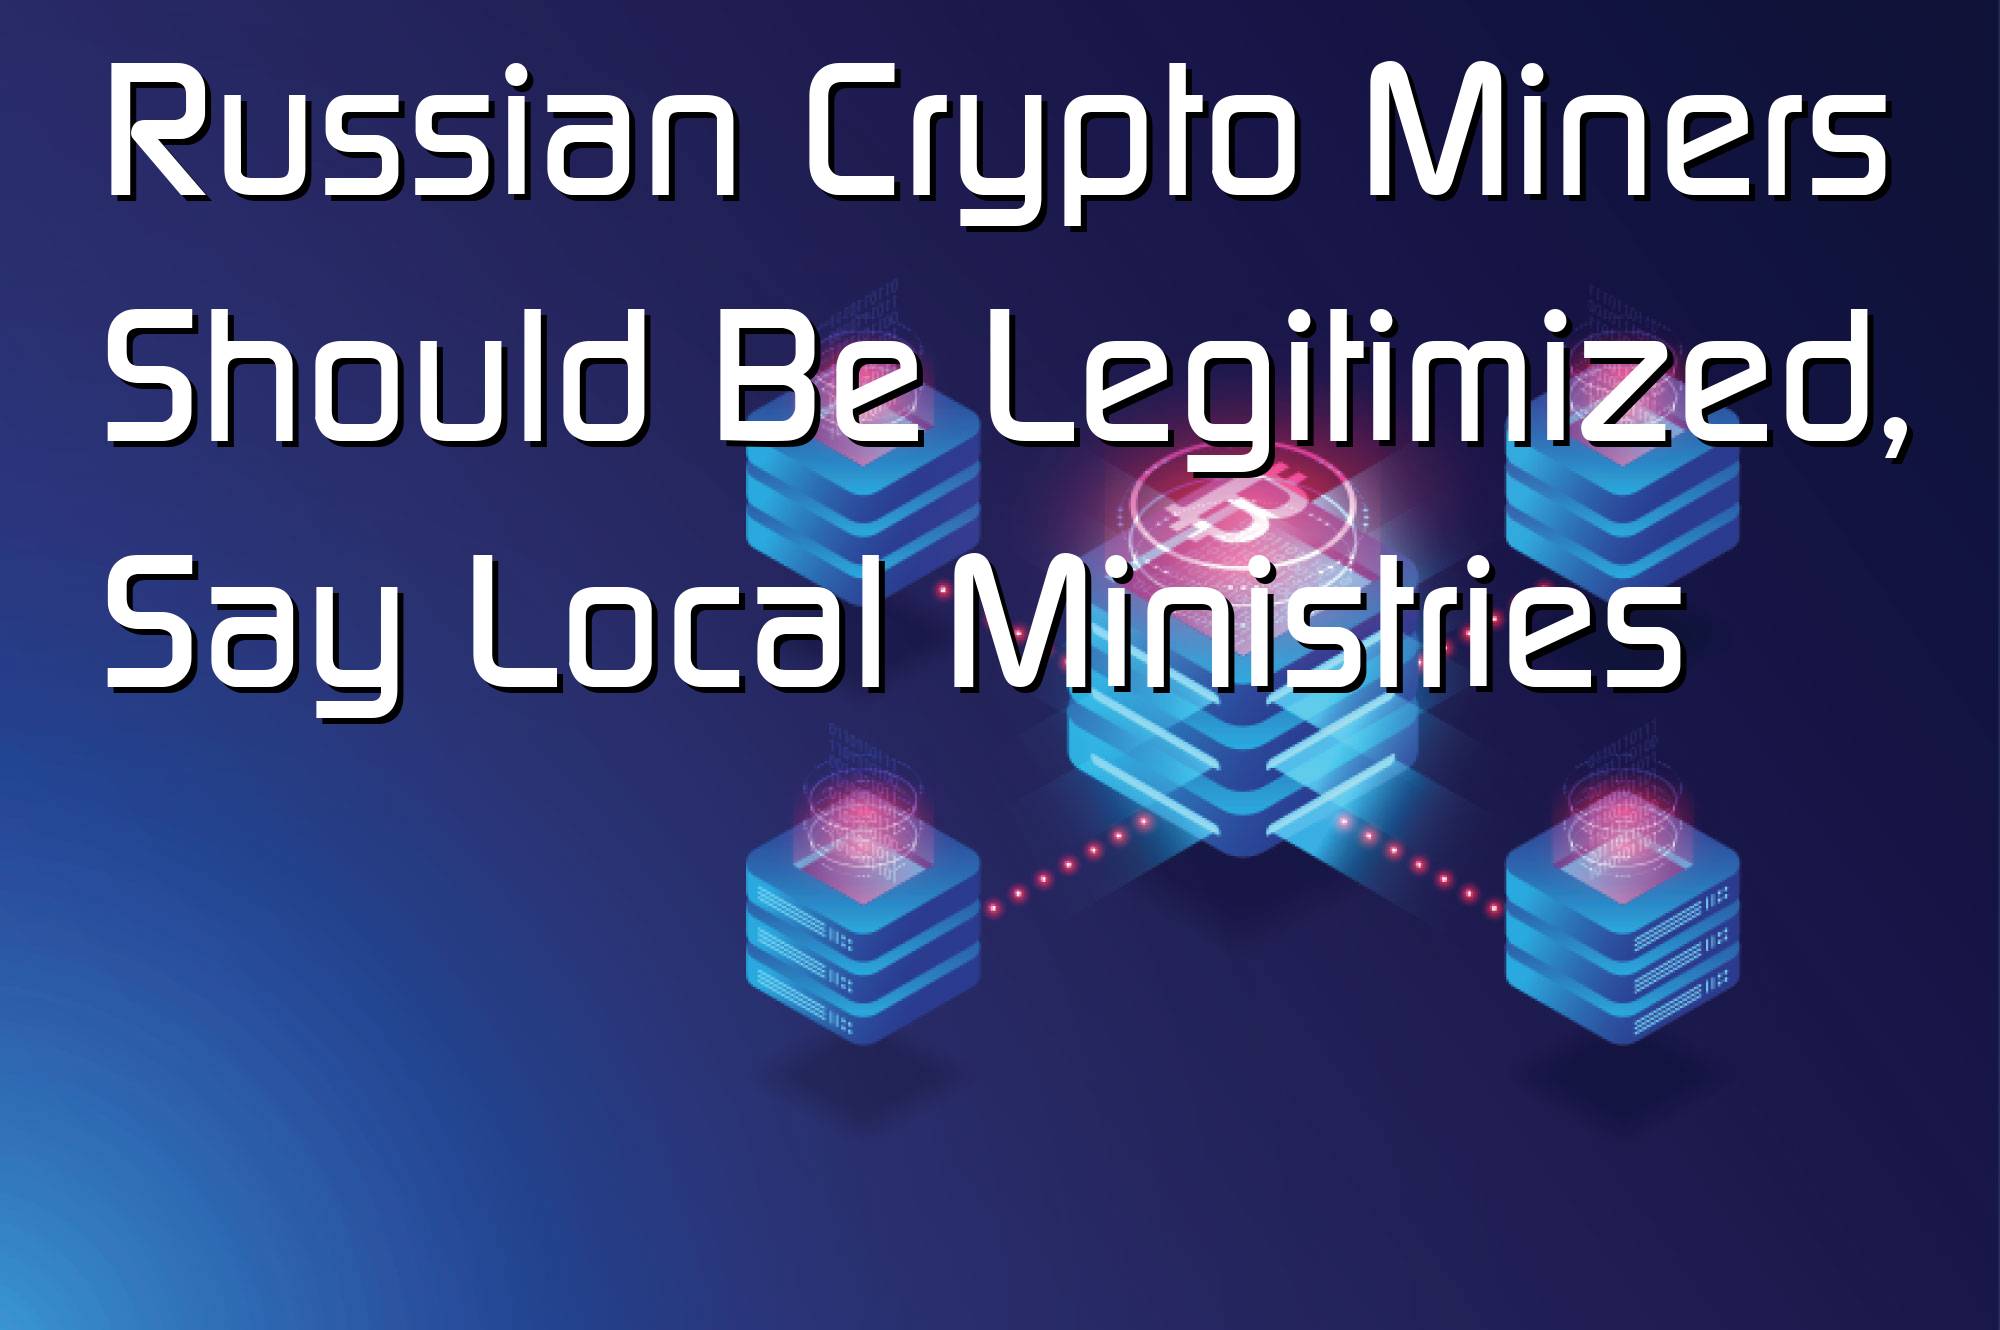 @$67122: Russian Crypto Miners Should Be Legitimized, Say Local Ministries